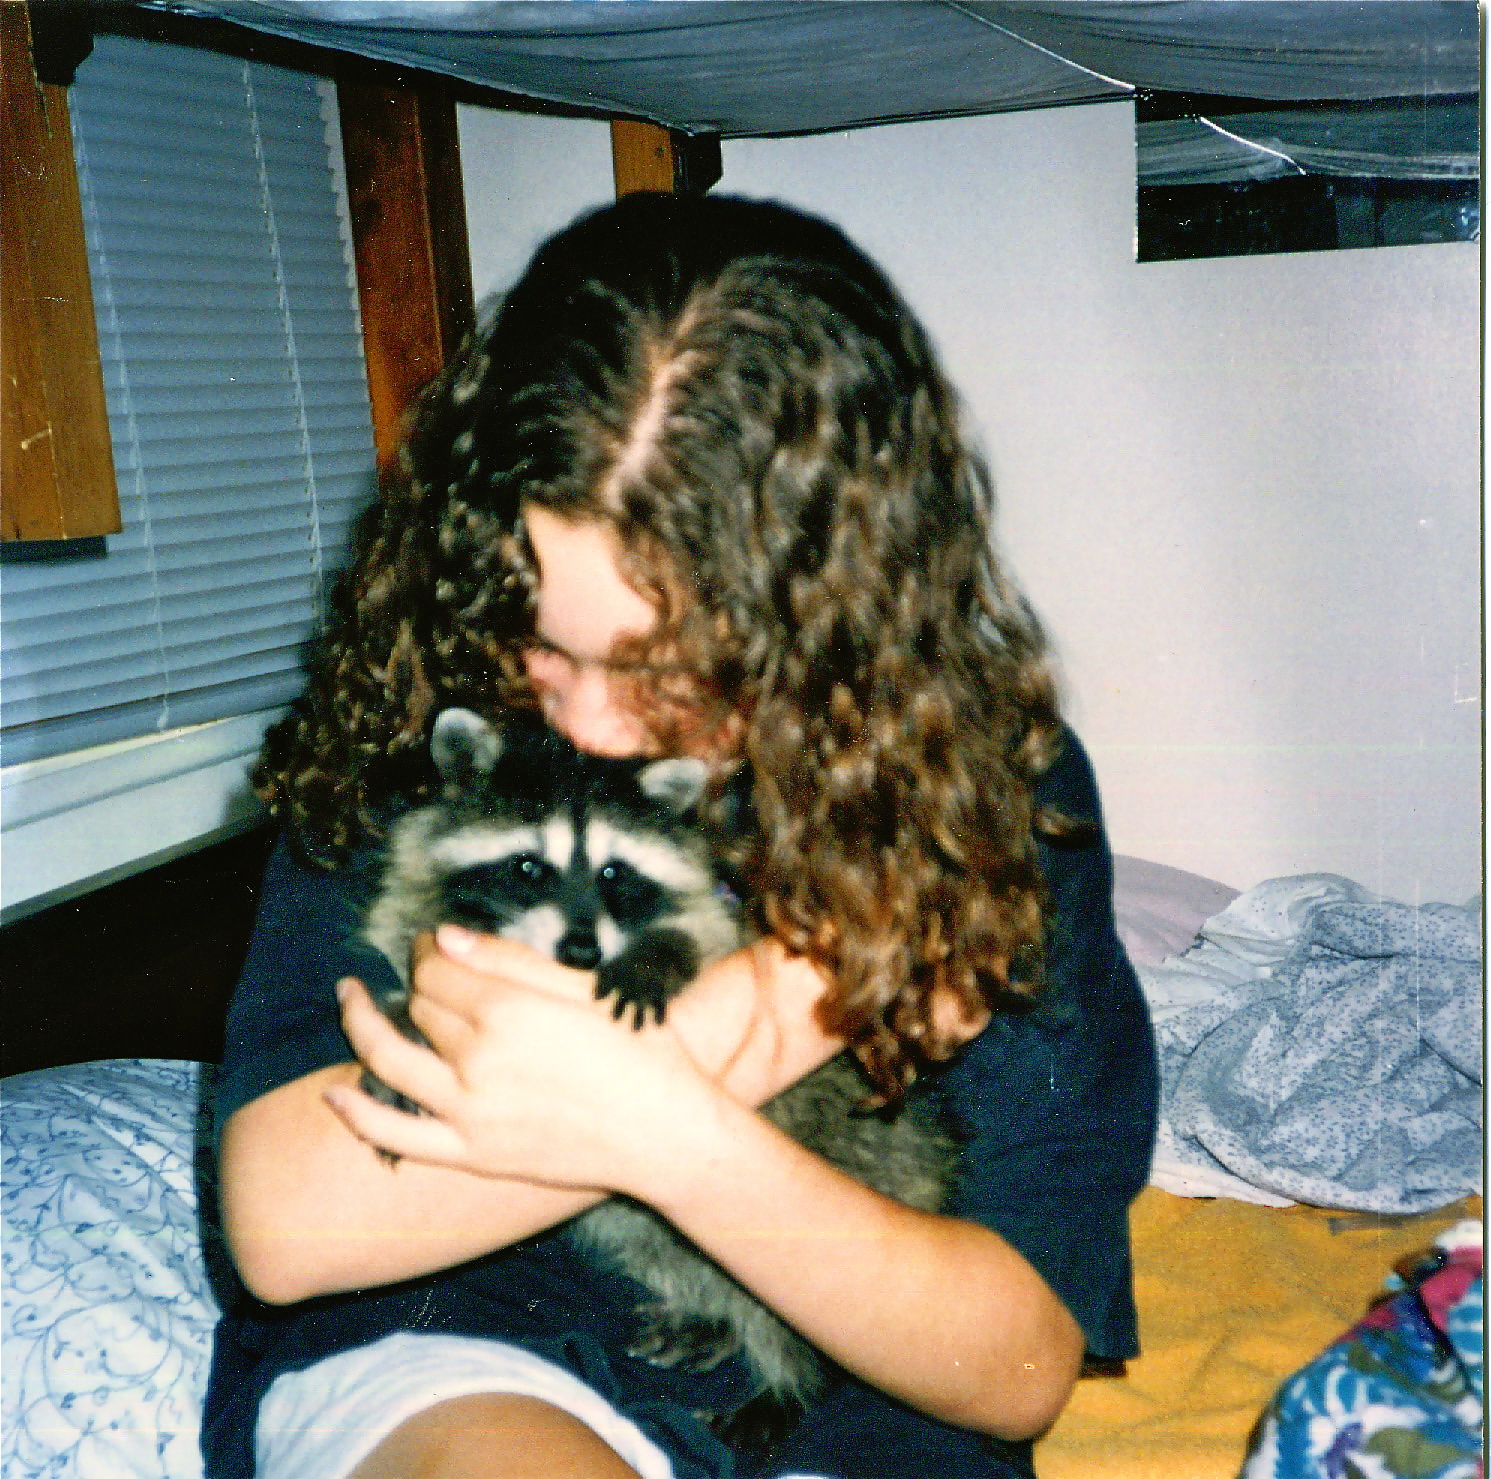 Nuzzling one of our raccoons.  DON'T try this at home!  Apparently my mom had never heard of baylisascaris, which is a serious zoonotic disease carried by raccoons.  Good to know...